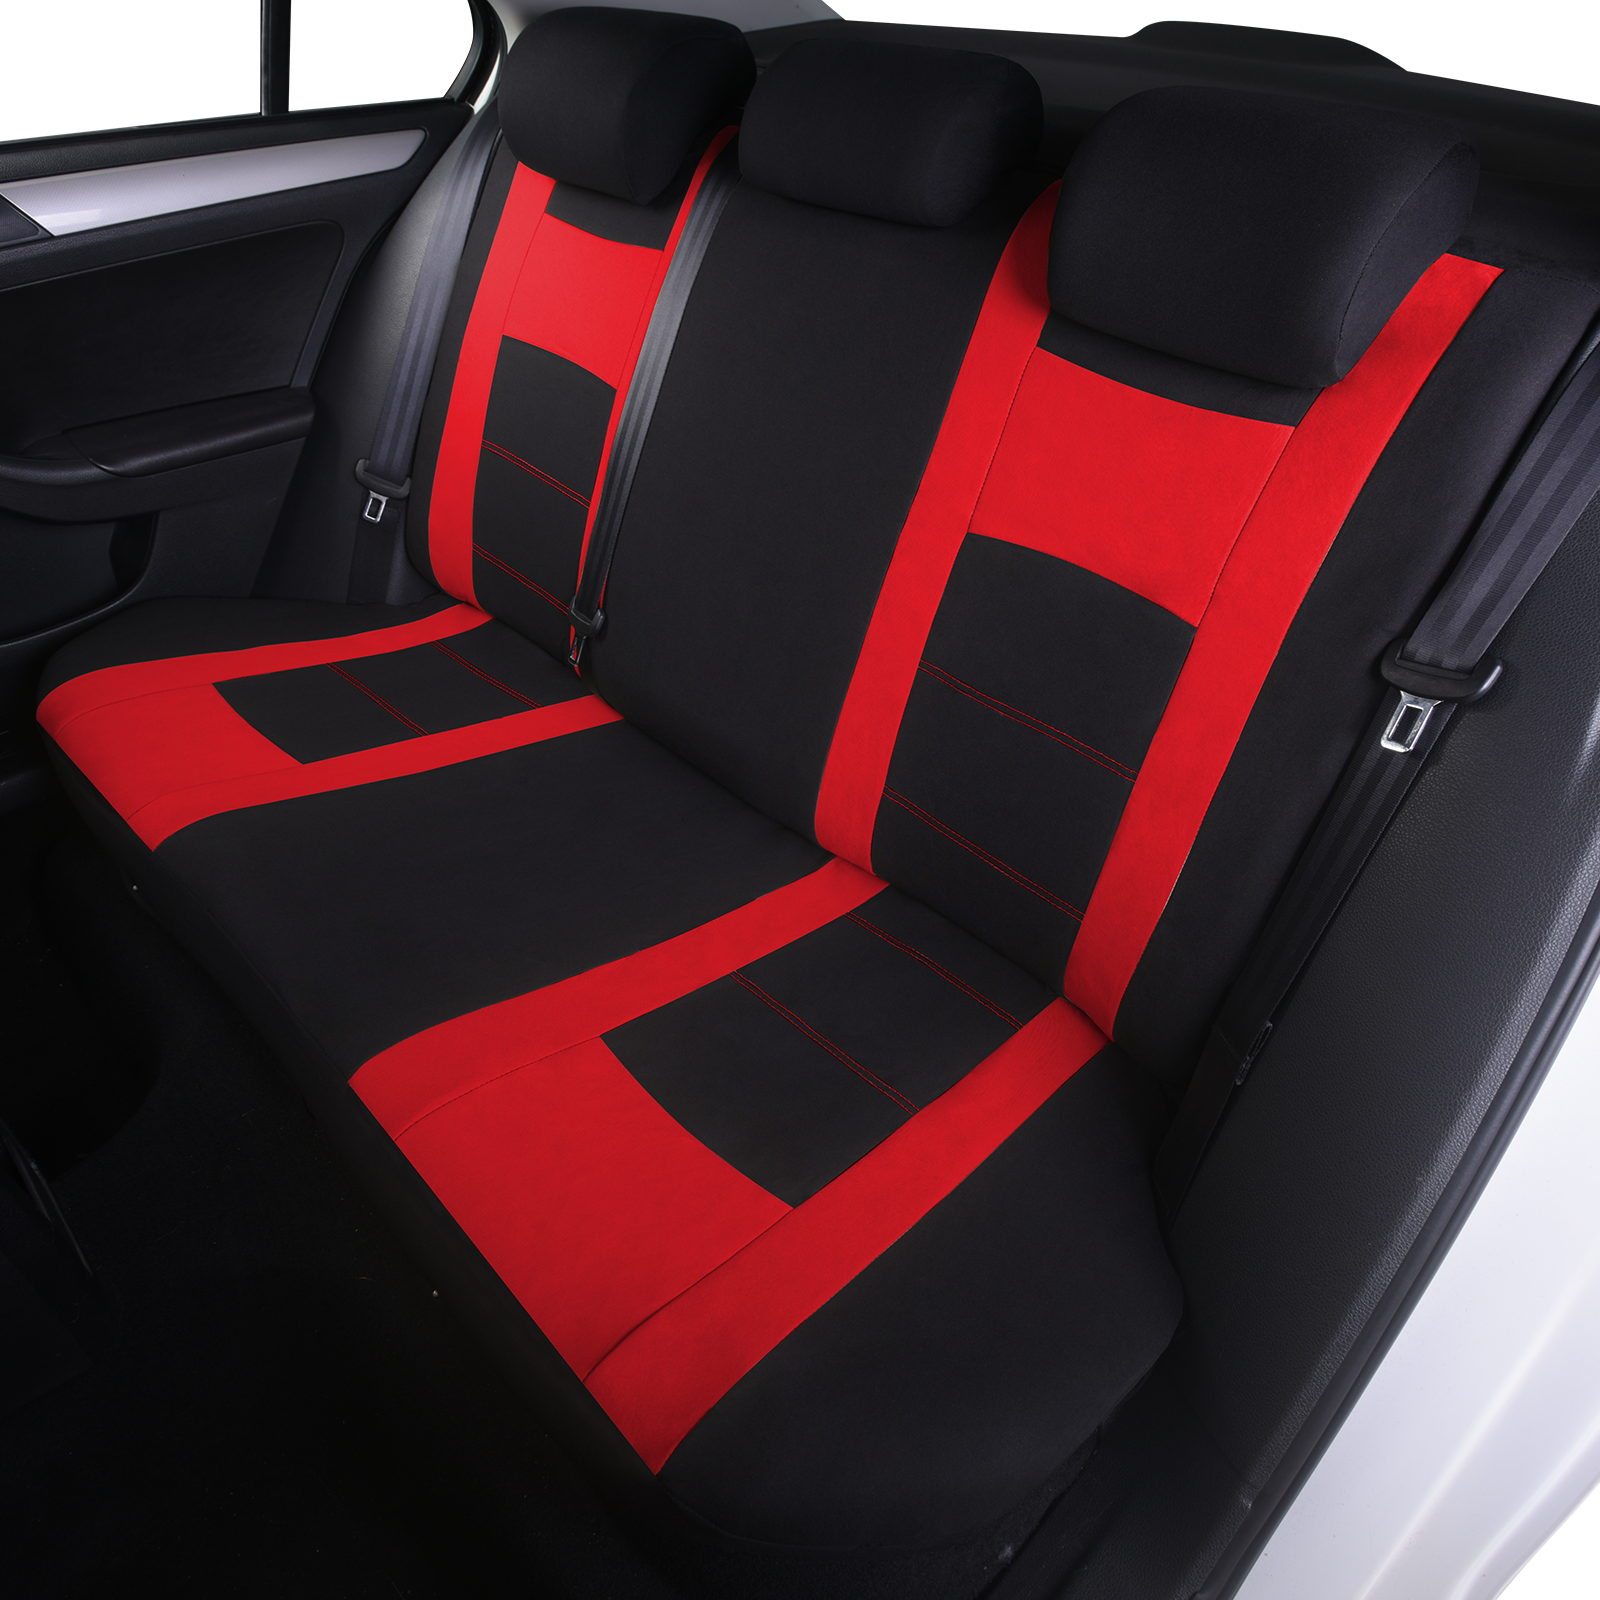 5 seat car seat cover polyester universal size for 90% car